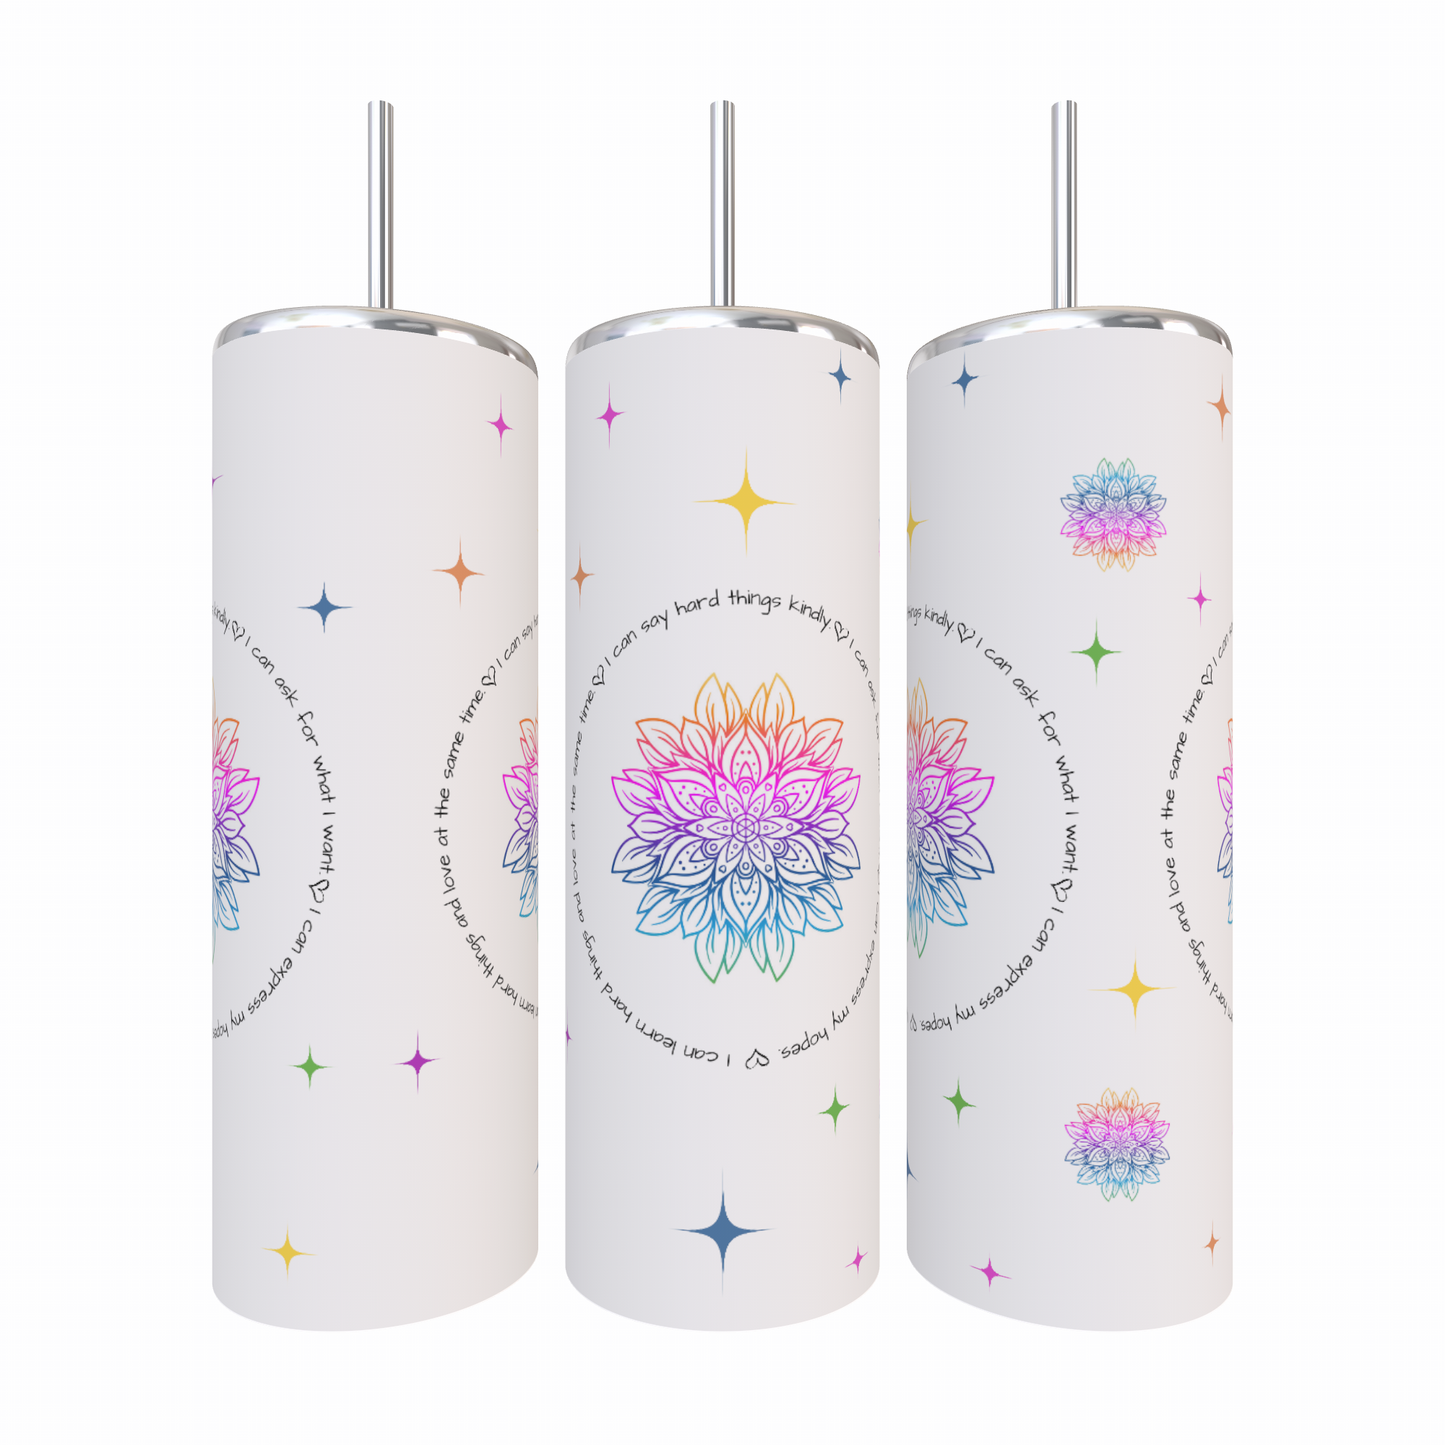 White tumbler cup with hombre rainbow mandalas and stars on it. The mantra around the big mandala reads: I can learn hard things and love at the same time. I can say hard things kindly. I can ask for what I want. I can express my hopes